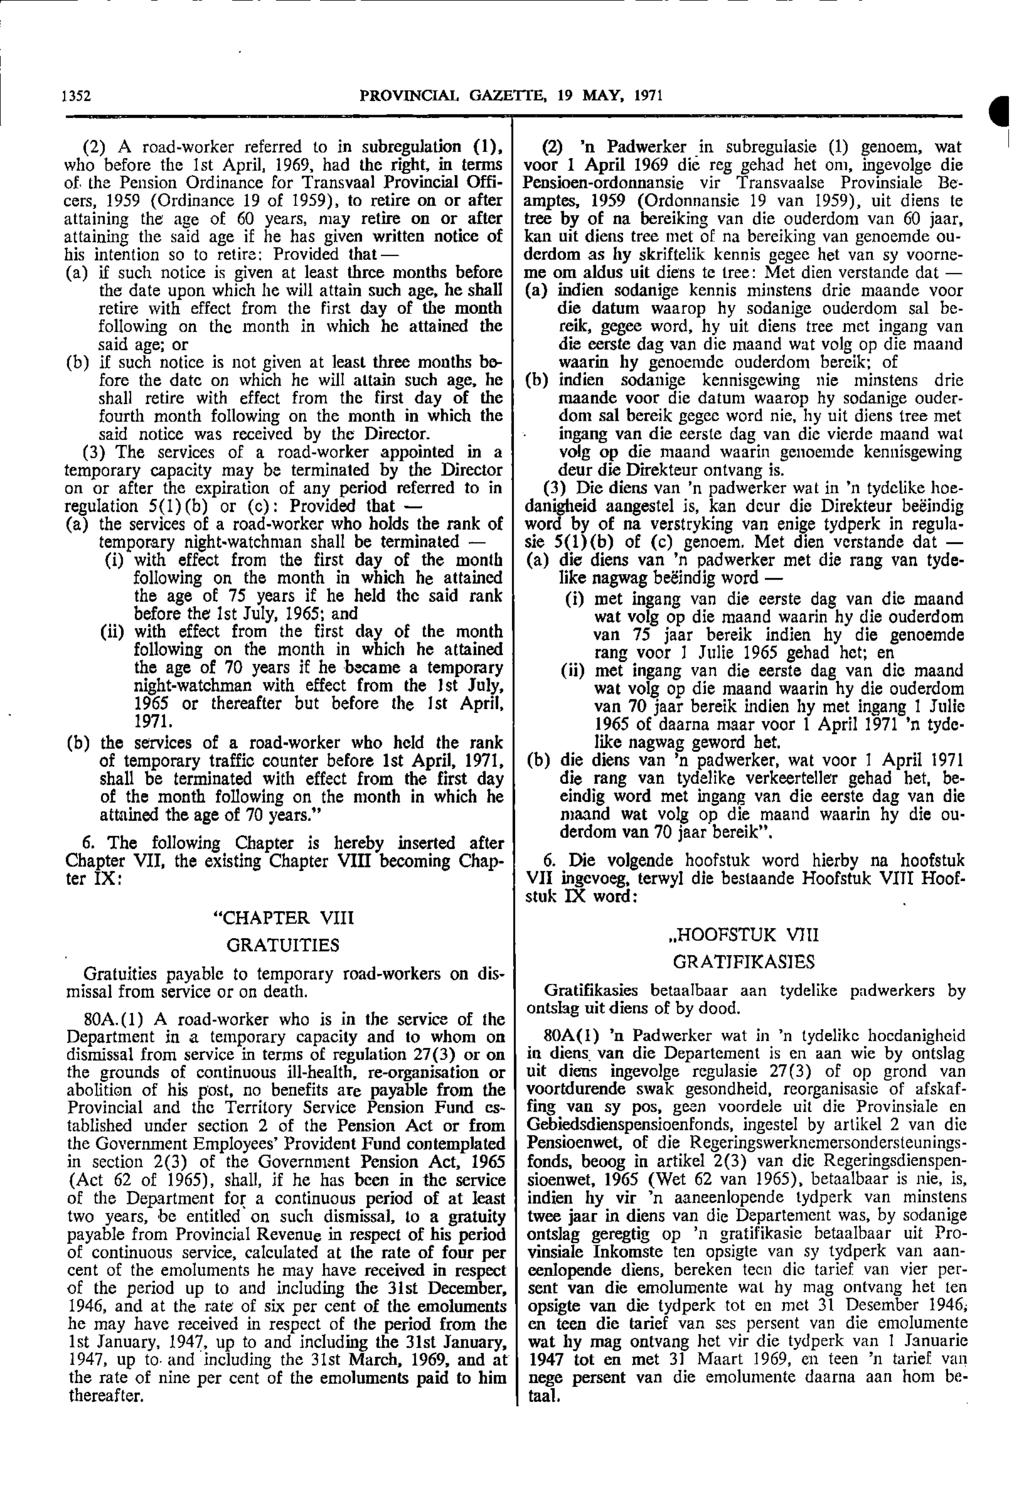 1352 PROVINCIAL GAZETTE 19 MAY 1971 (2) A road worker referred to in subregulation (1) (2) n Padwerker in subregulasie (1) genoem wat who before the 1st April 1969 had the right in terms voor 1 April